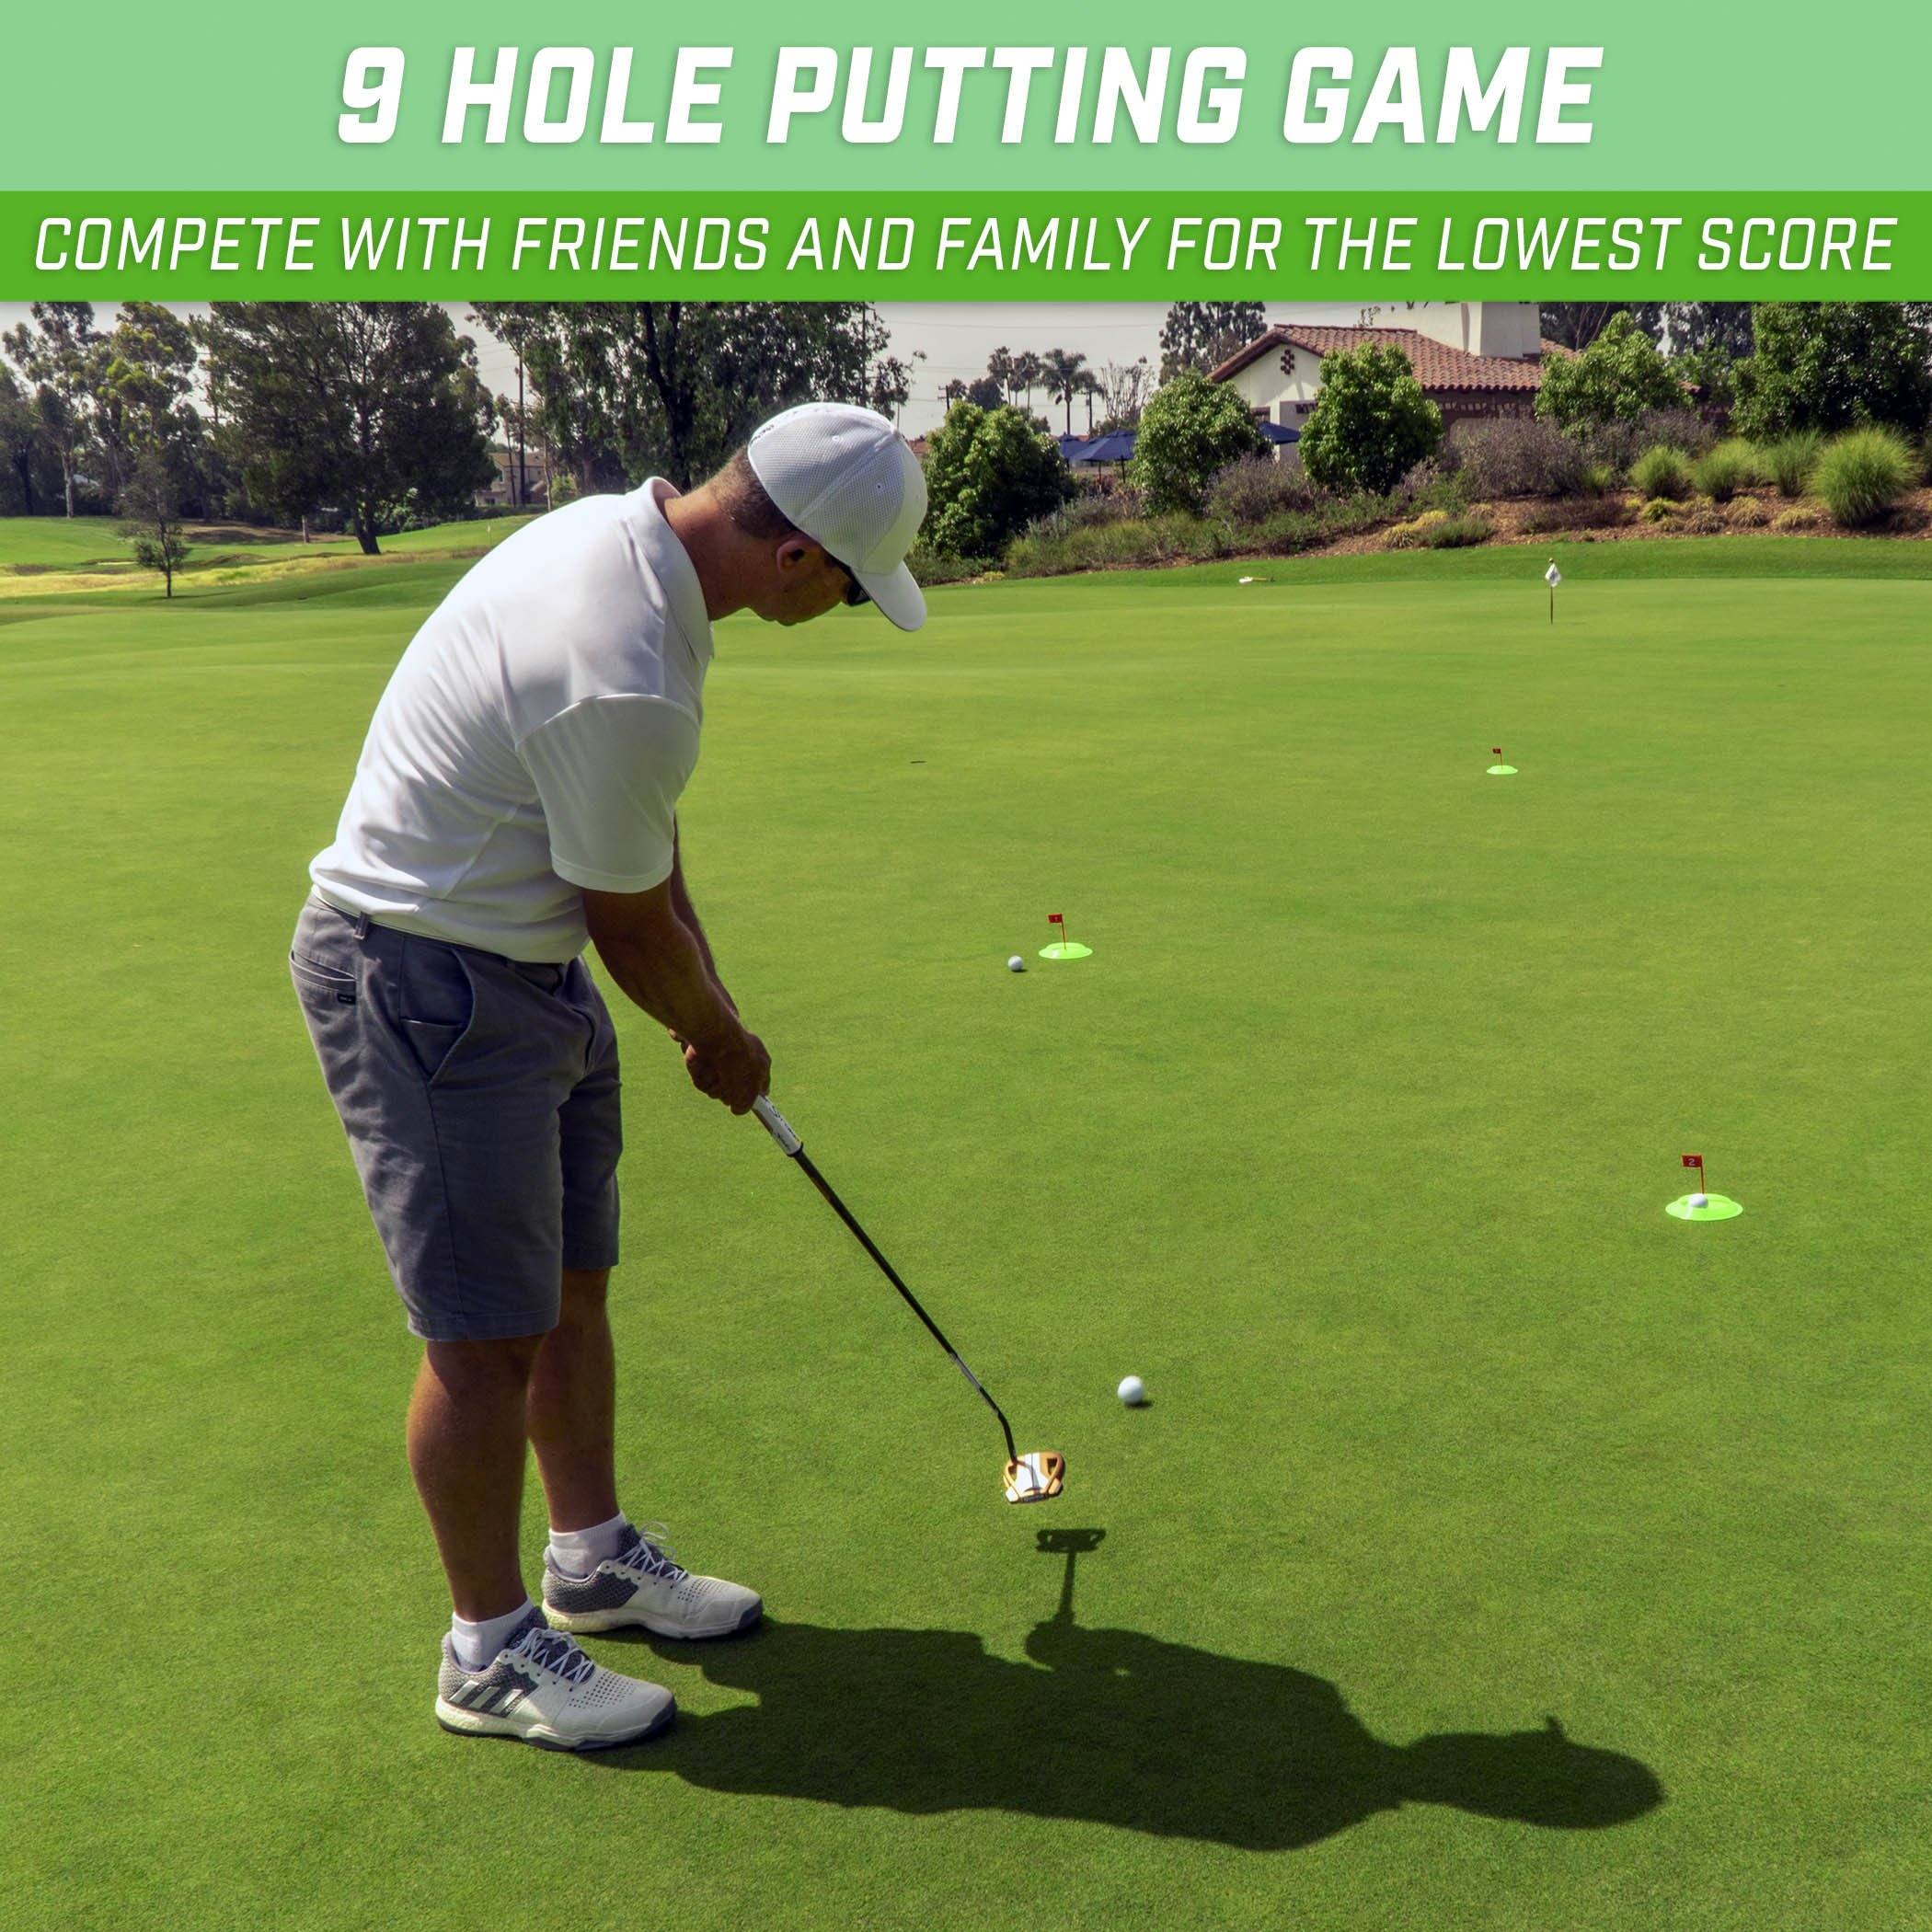 9 of Your Favorite Games to Play on the Golf Course